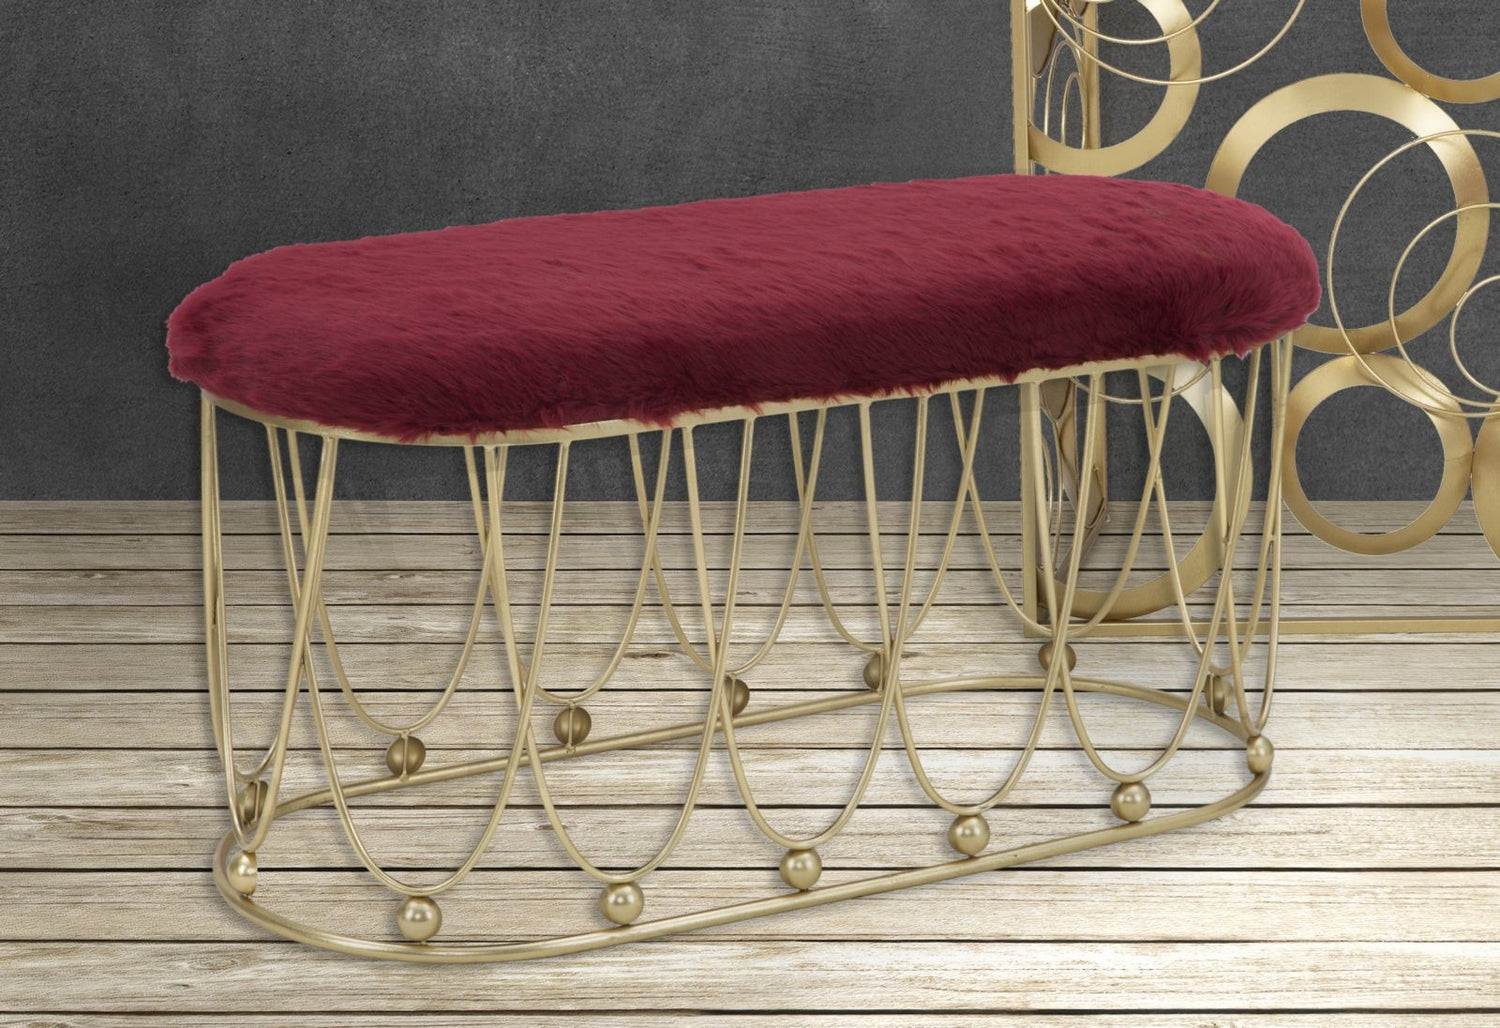 Buy Metal bench, upholstered with Amelie Bordeaux / Gold fabric, L91.5xW40.5xH46 cm online, best price, free delivery